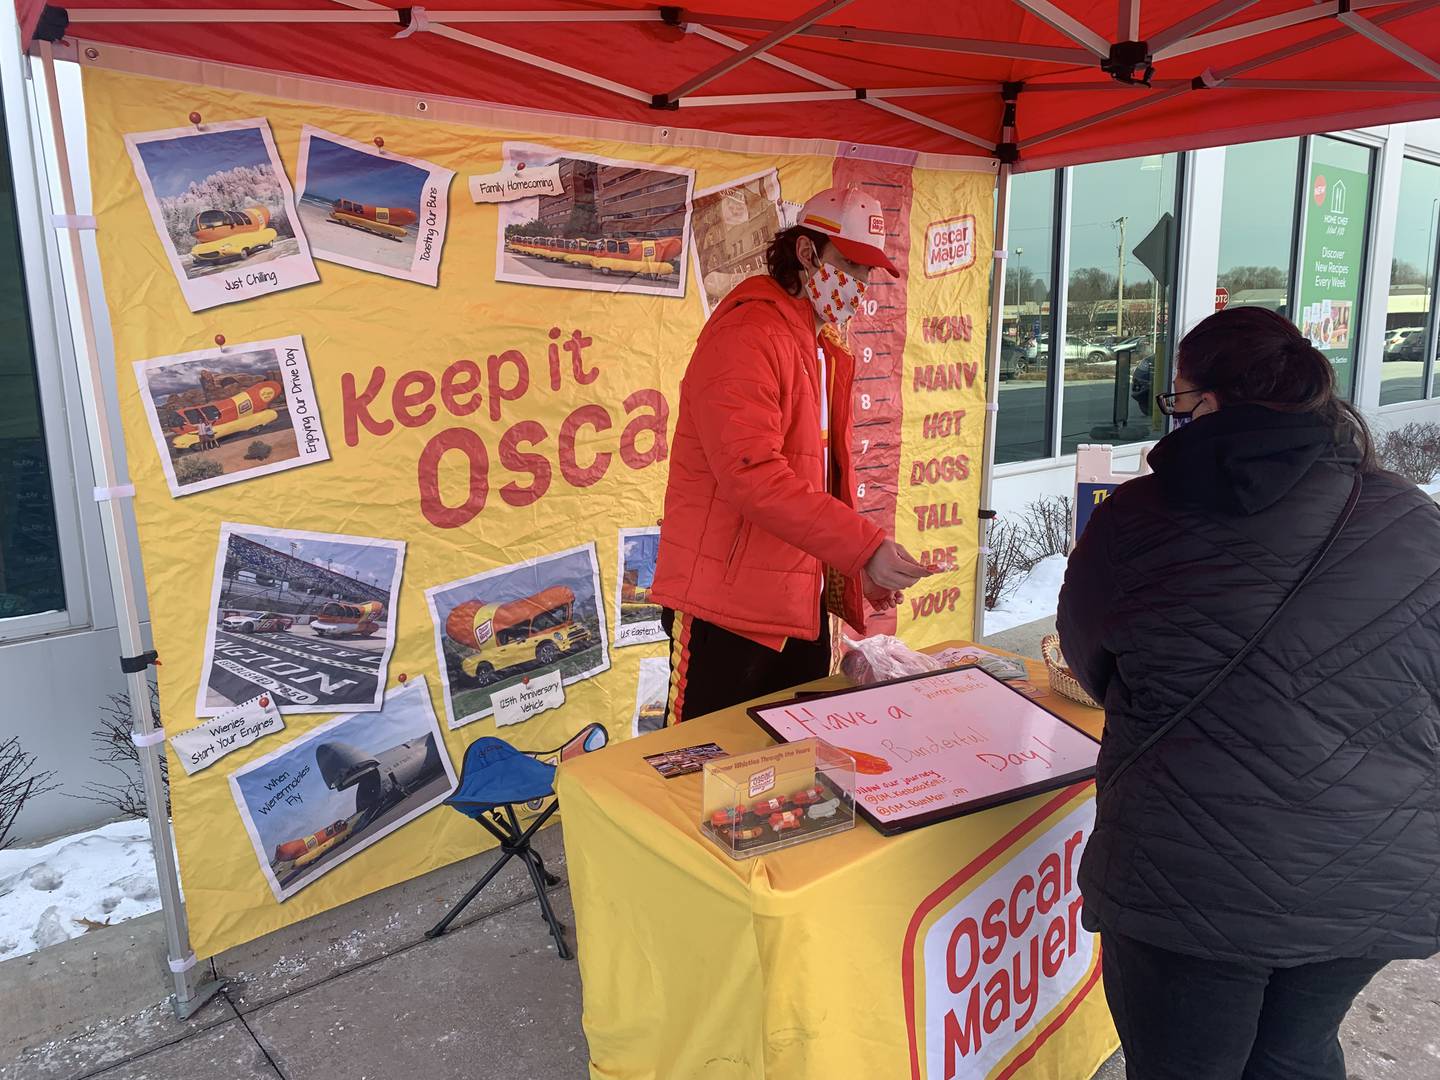 Brandon Mazzaferro of Crystal Lake and the driver of the Oscar Mayer Wienermobile visits with customers outside Mariano's in Crystal Lake on Sunday, Jan. 16, 2022.